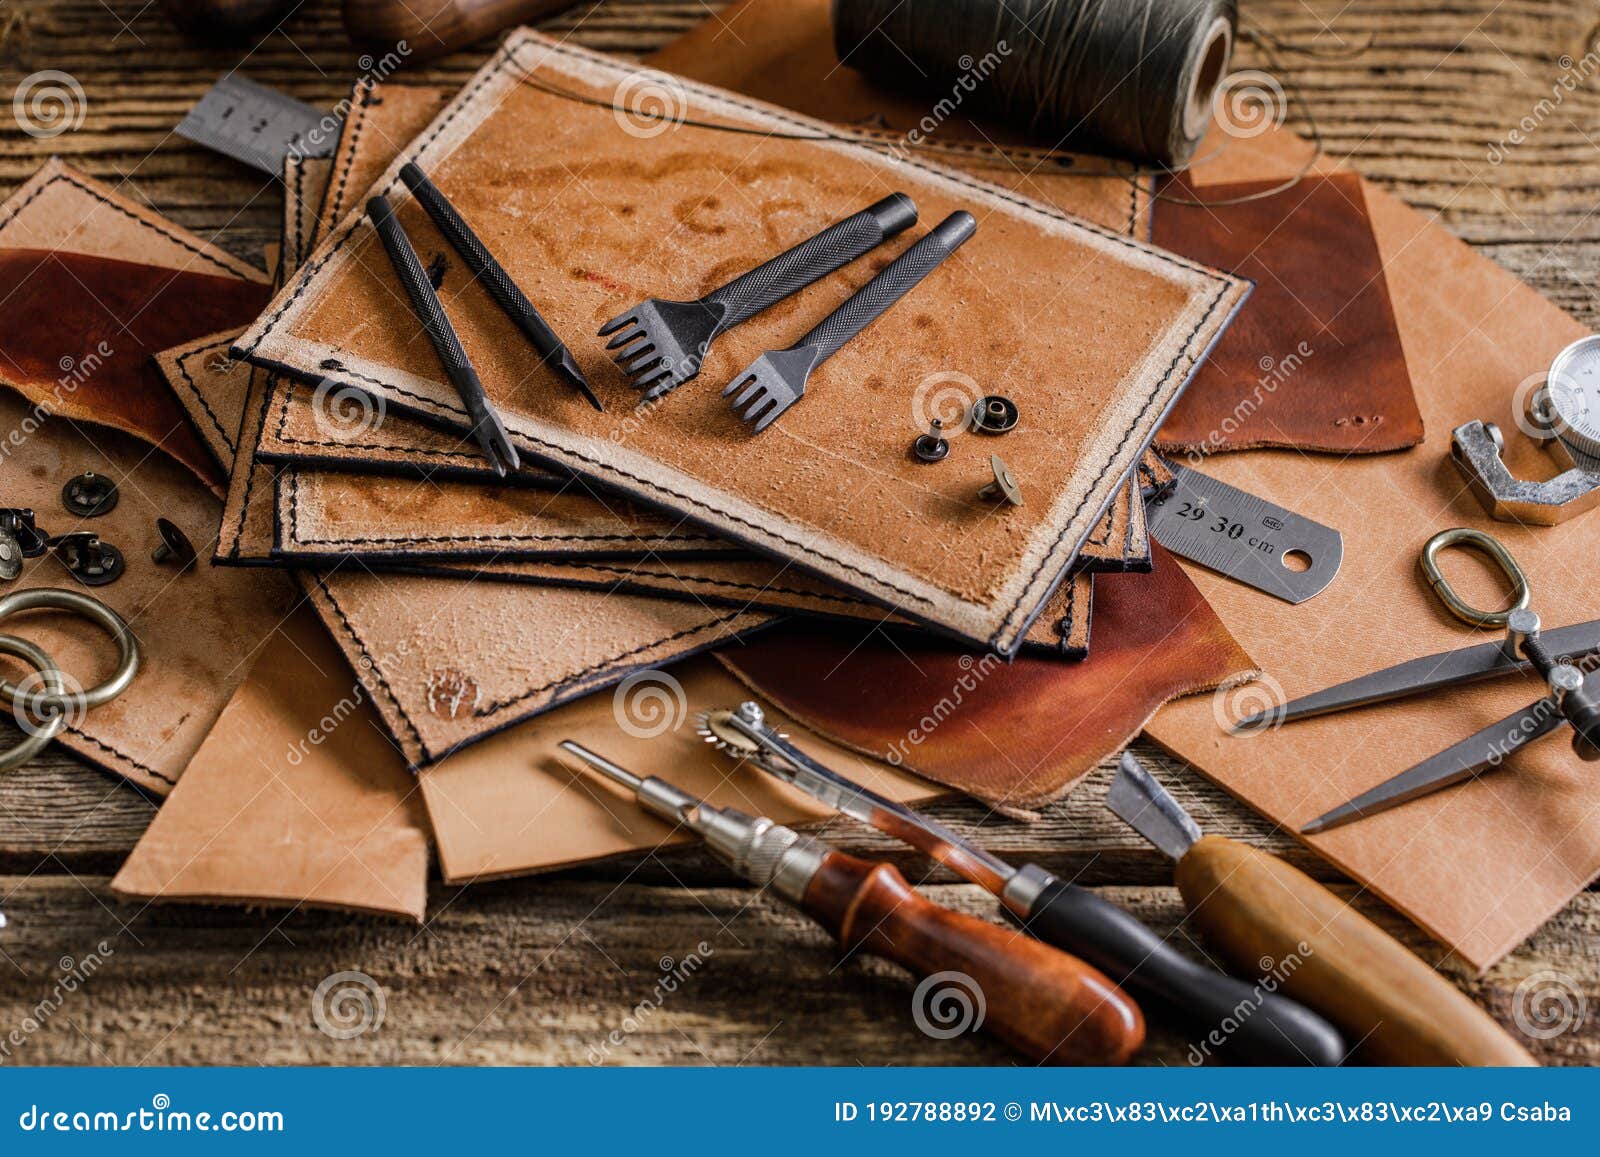 Tools for leather working Stock Photo by ©norgallery 163762750